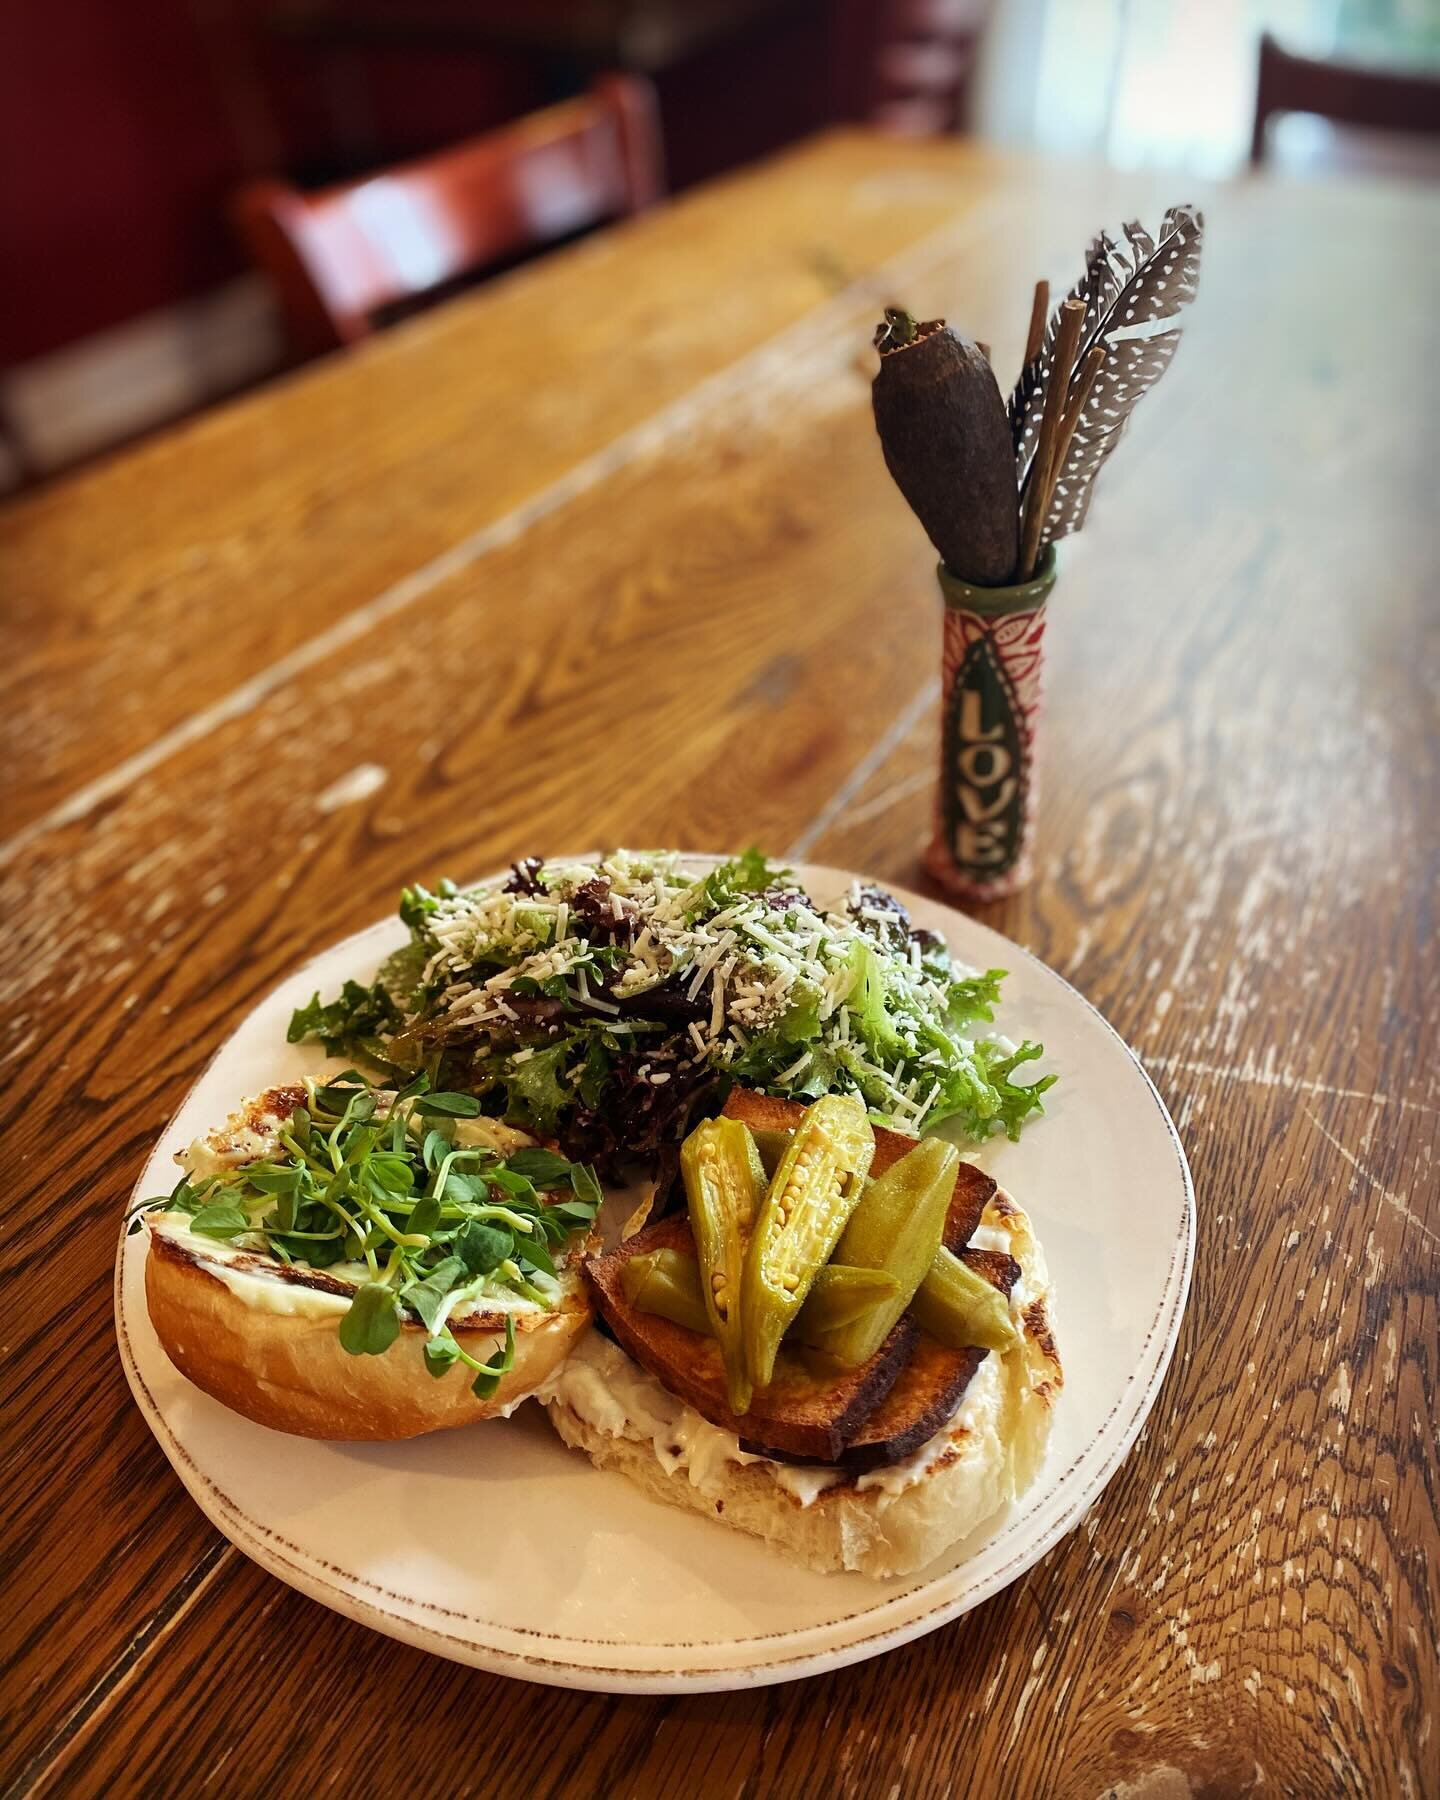 🚨Lunch Special Alert!🚨We liked this smoked &amp; fried tofu sandwich so much we decided to keep it for another week but switch it up a bit! Now coming with dill pickled okra, garlic aioli, and homemade herbed ricotta. We&rsquo;re closed tomorrow so